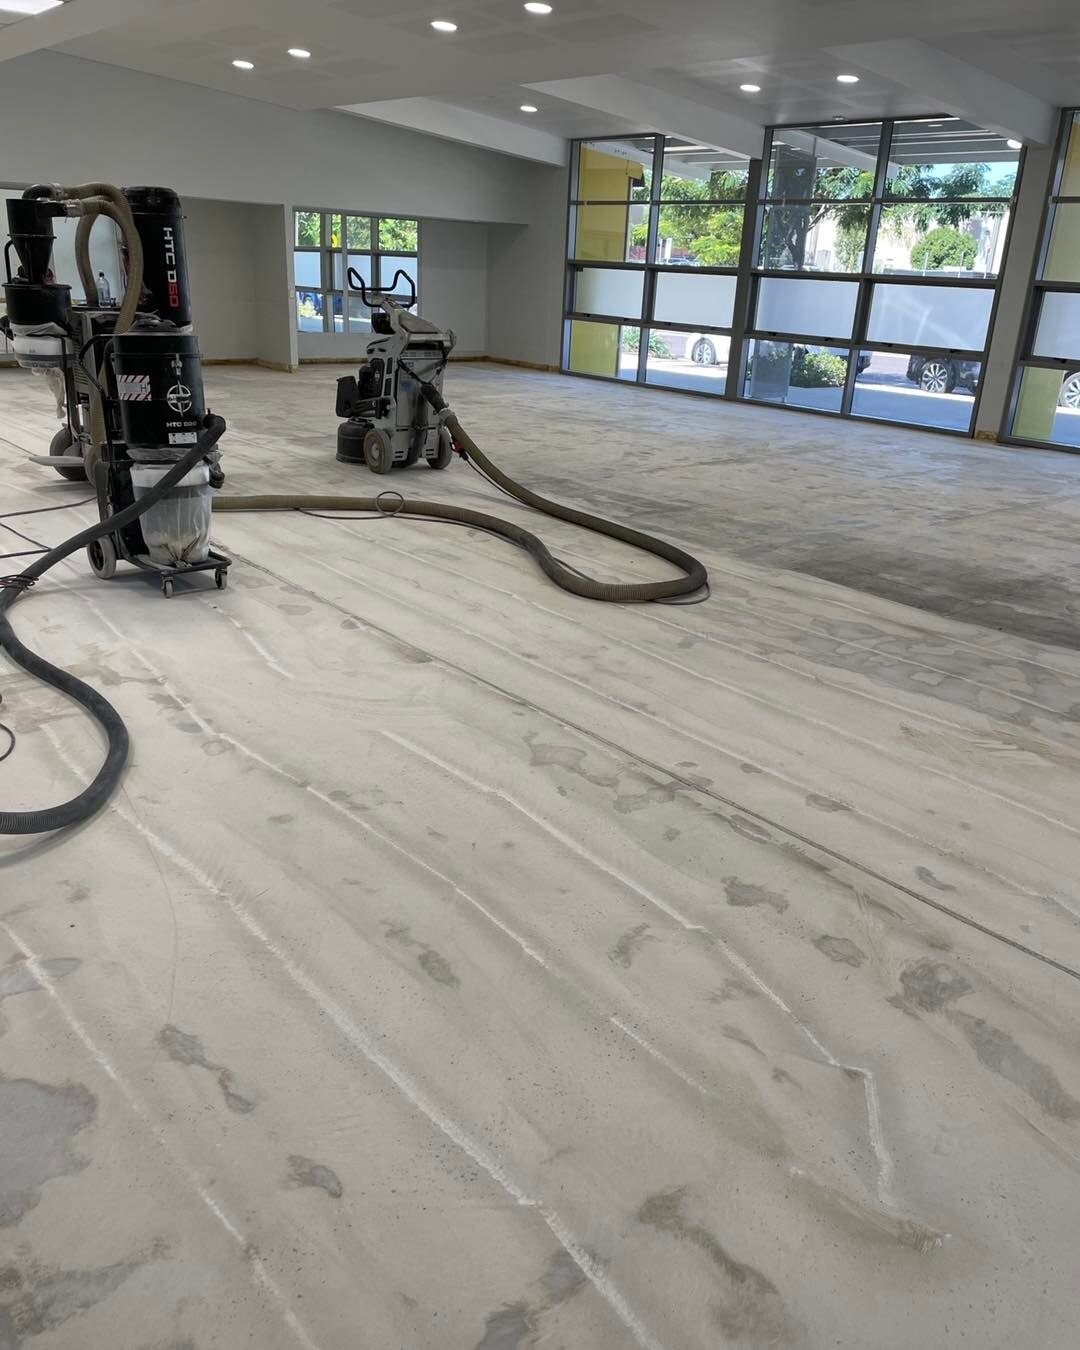 Uplift. Prep. Install.

After removing the old flooring we discovered an expansion gap had been covered over, causing the existing floor on top to fail. 

By installing the correct expansion stripes we were able to install new floor while leaving a s